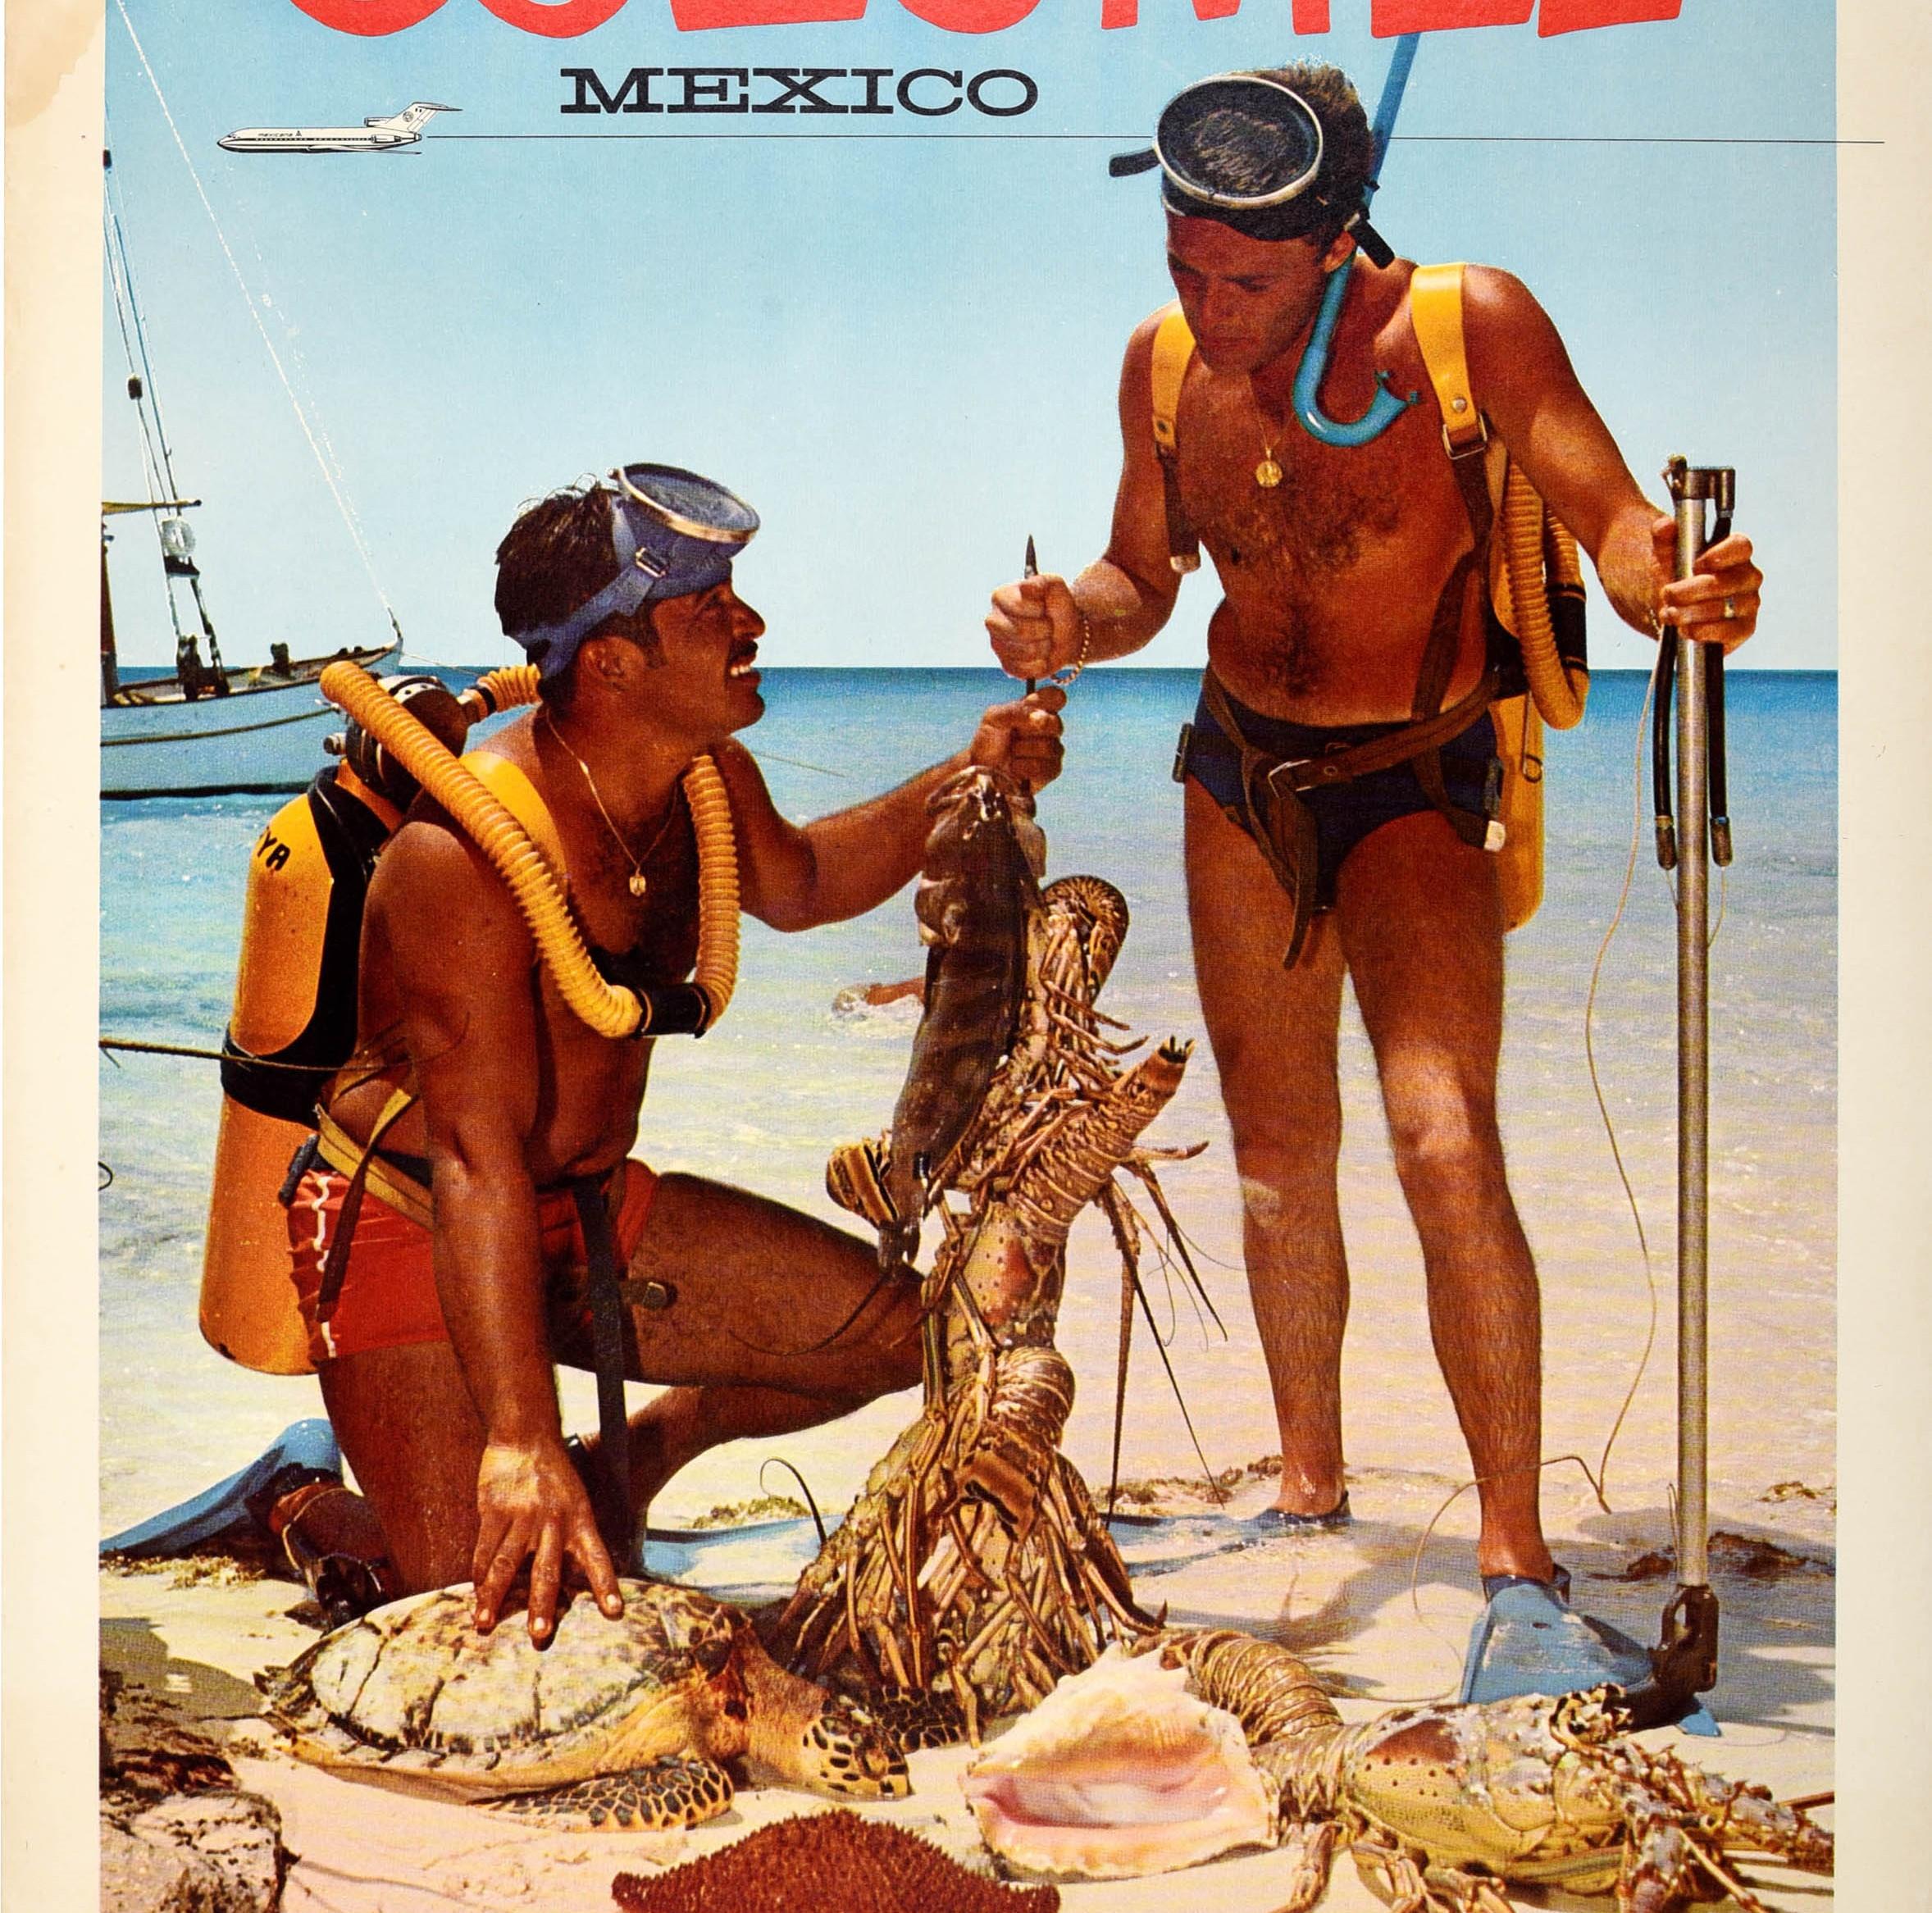 Mid-20th Century Original Vintage Air Travel Poster Cozumel Mexico Mexicana Scuba Diving Fishing